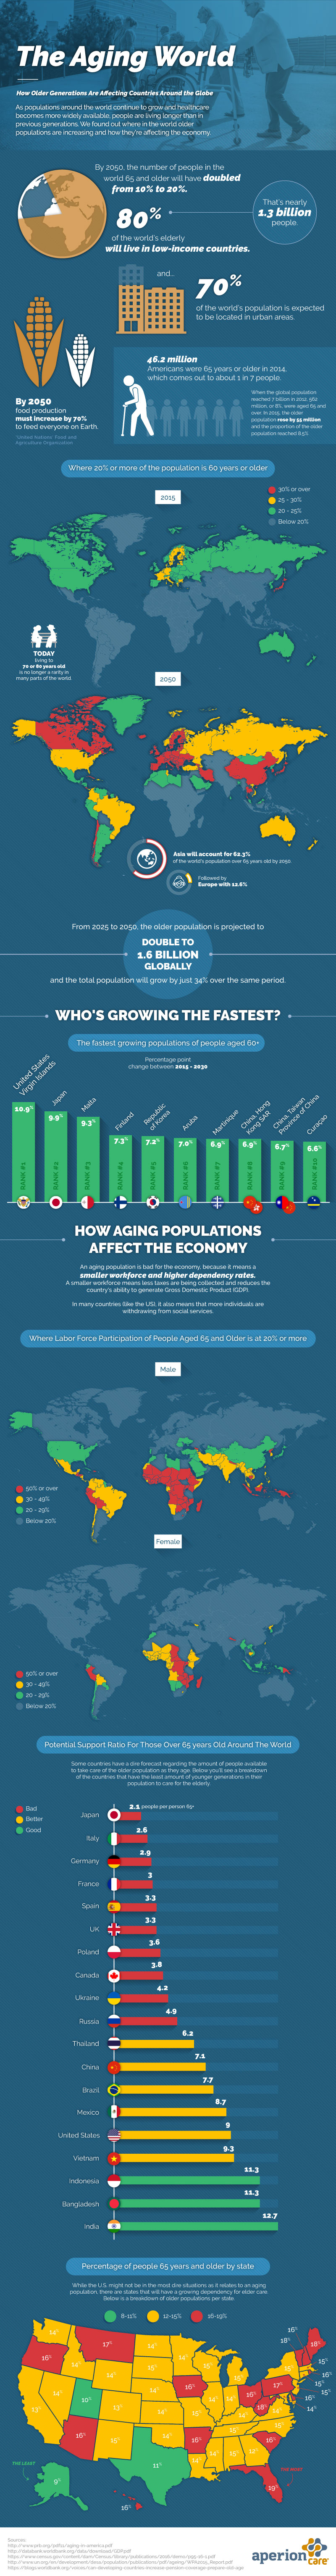 The Demographic Timebomb: A Rapidly Aging Population